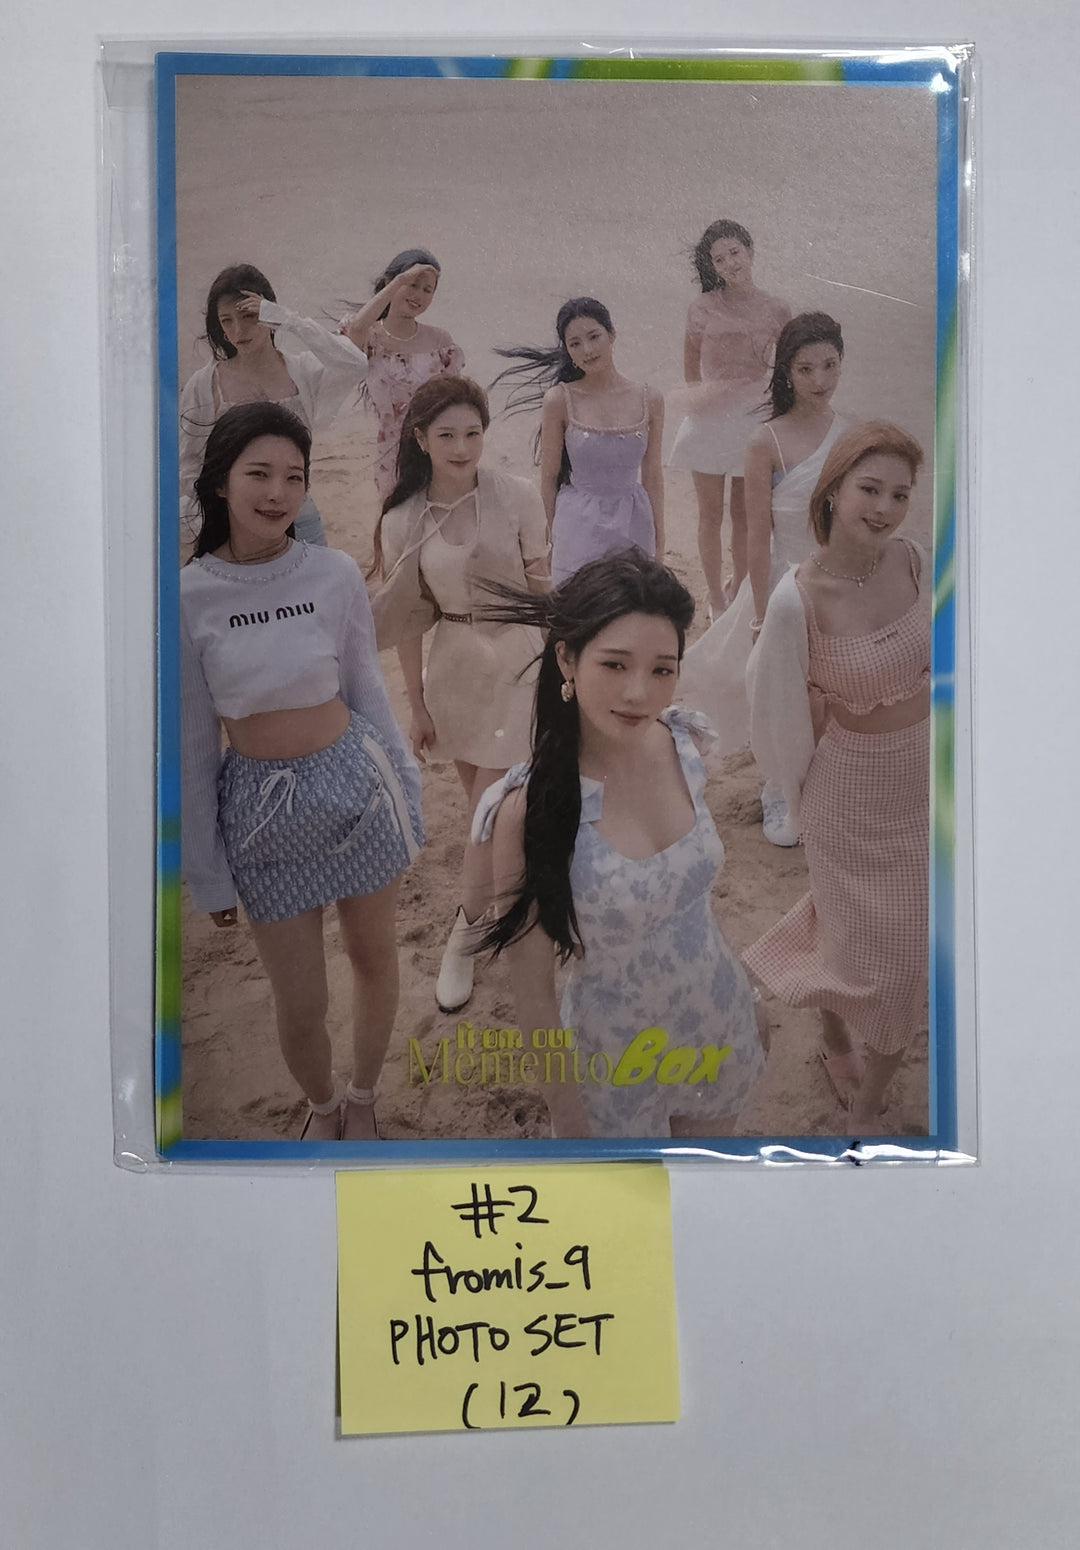 Fromis_9 "from our Memento Box" - Weverse Shop Pre-Order Benefit Photo Stand